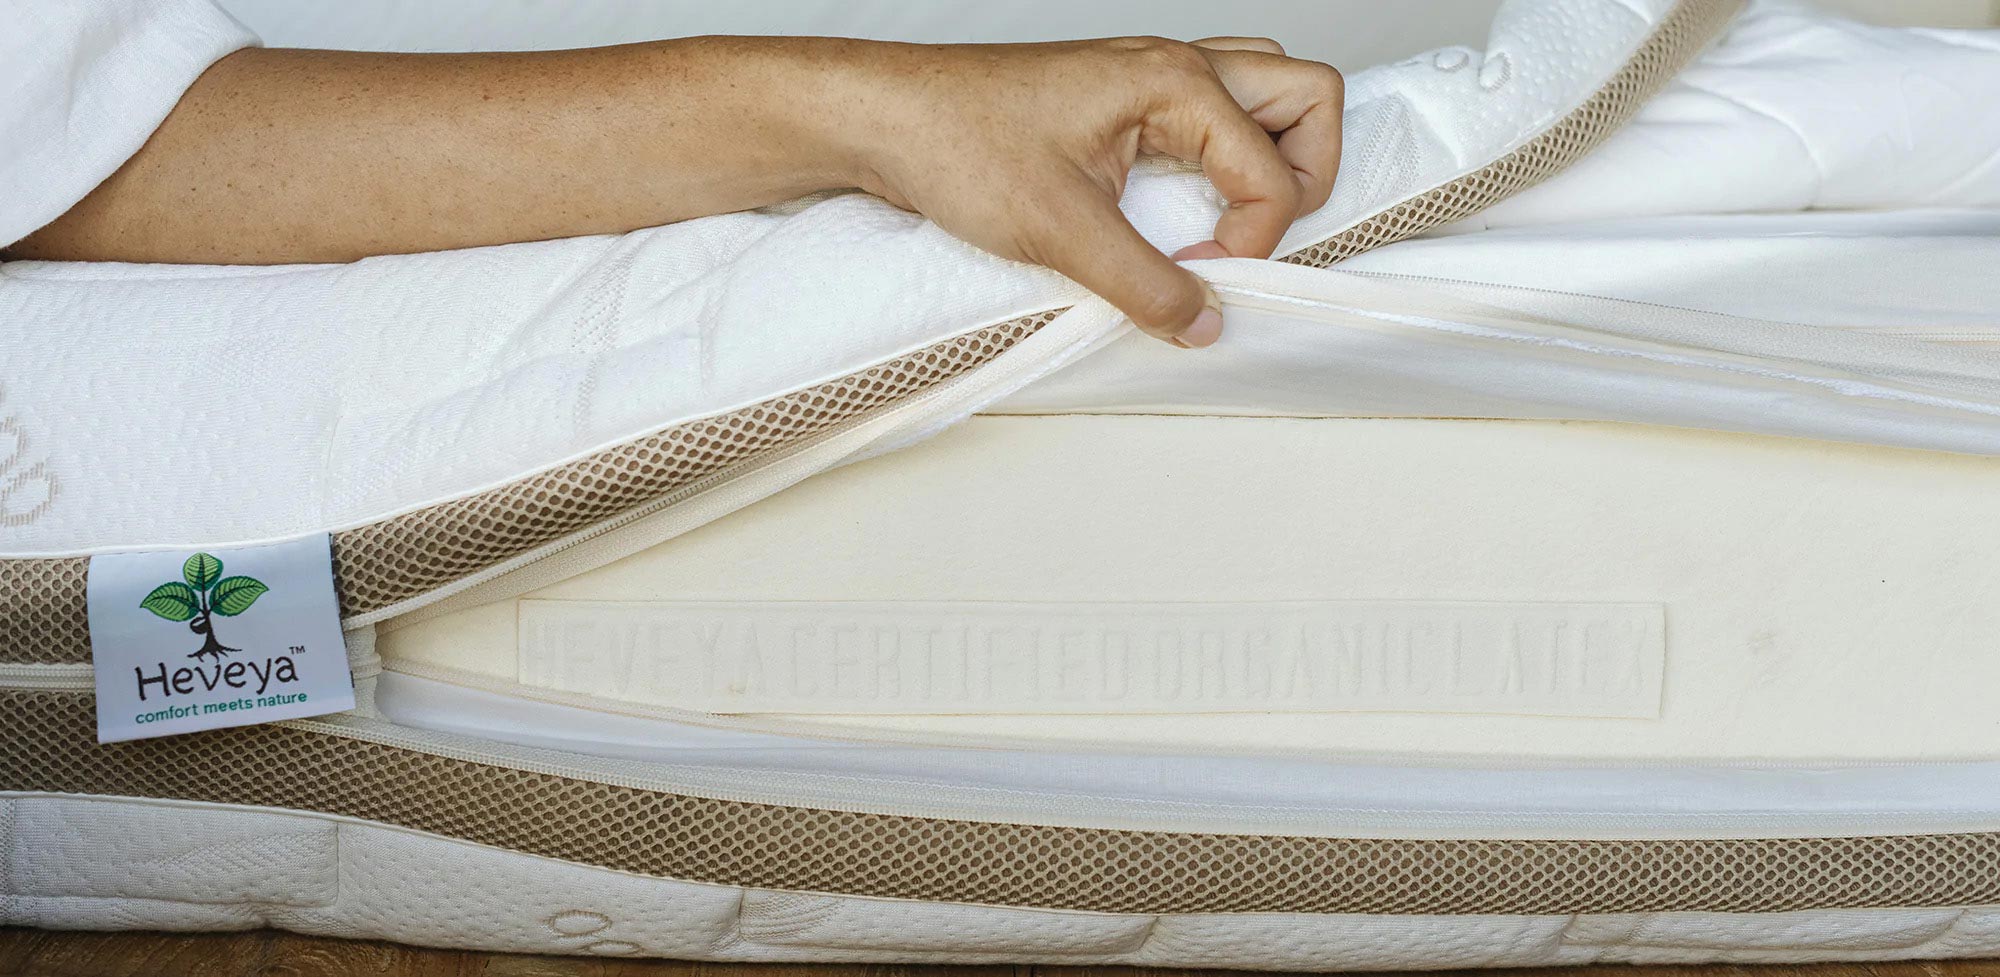 Buy Mattress Or Bed Online - What To Look Out For